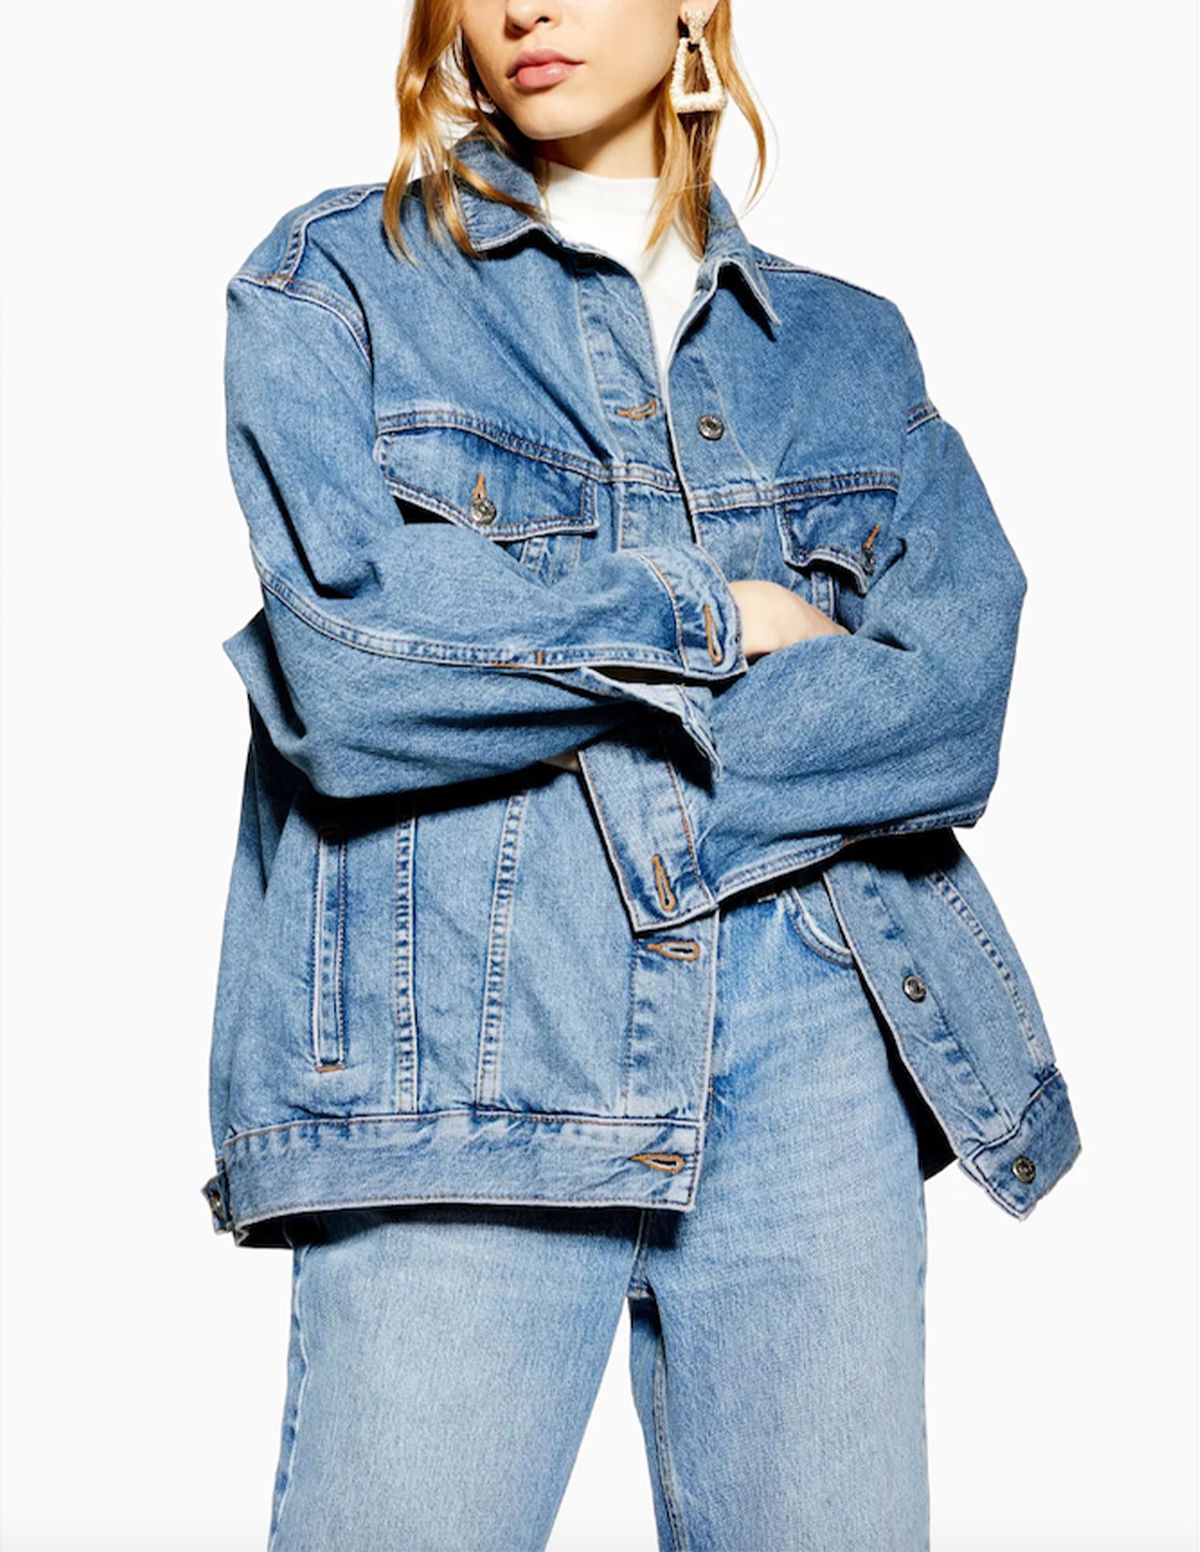 This Is Exactly What to Wear With a Jean Jacket | Who What Wear